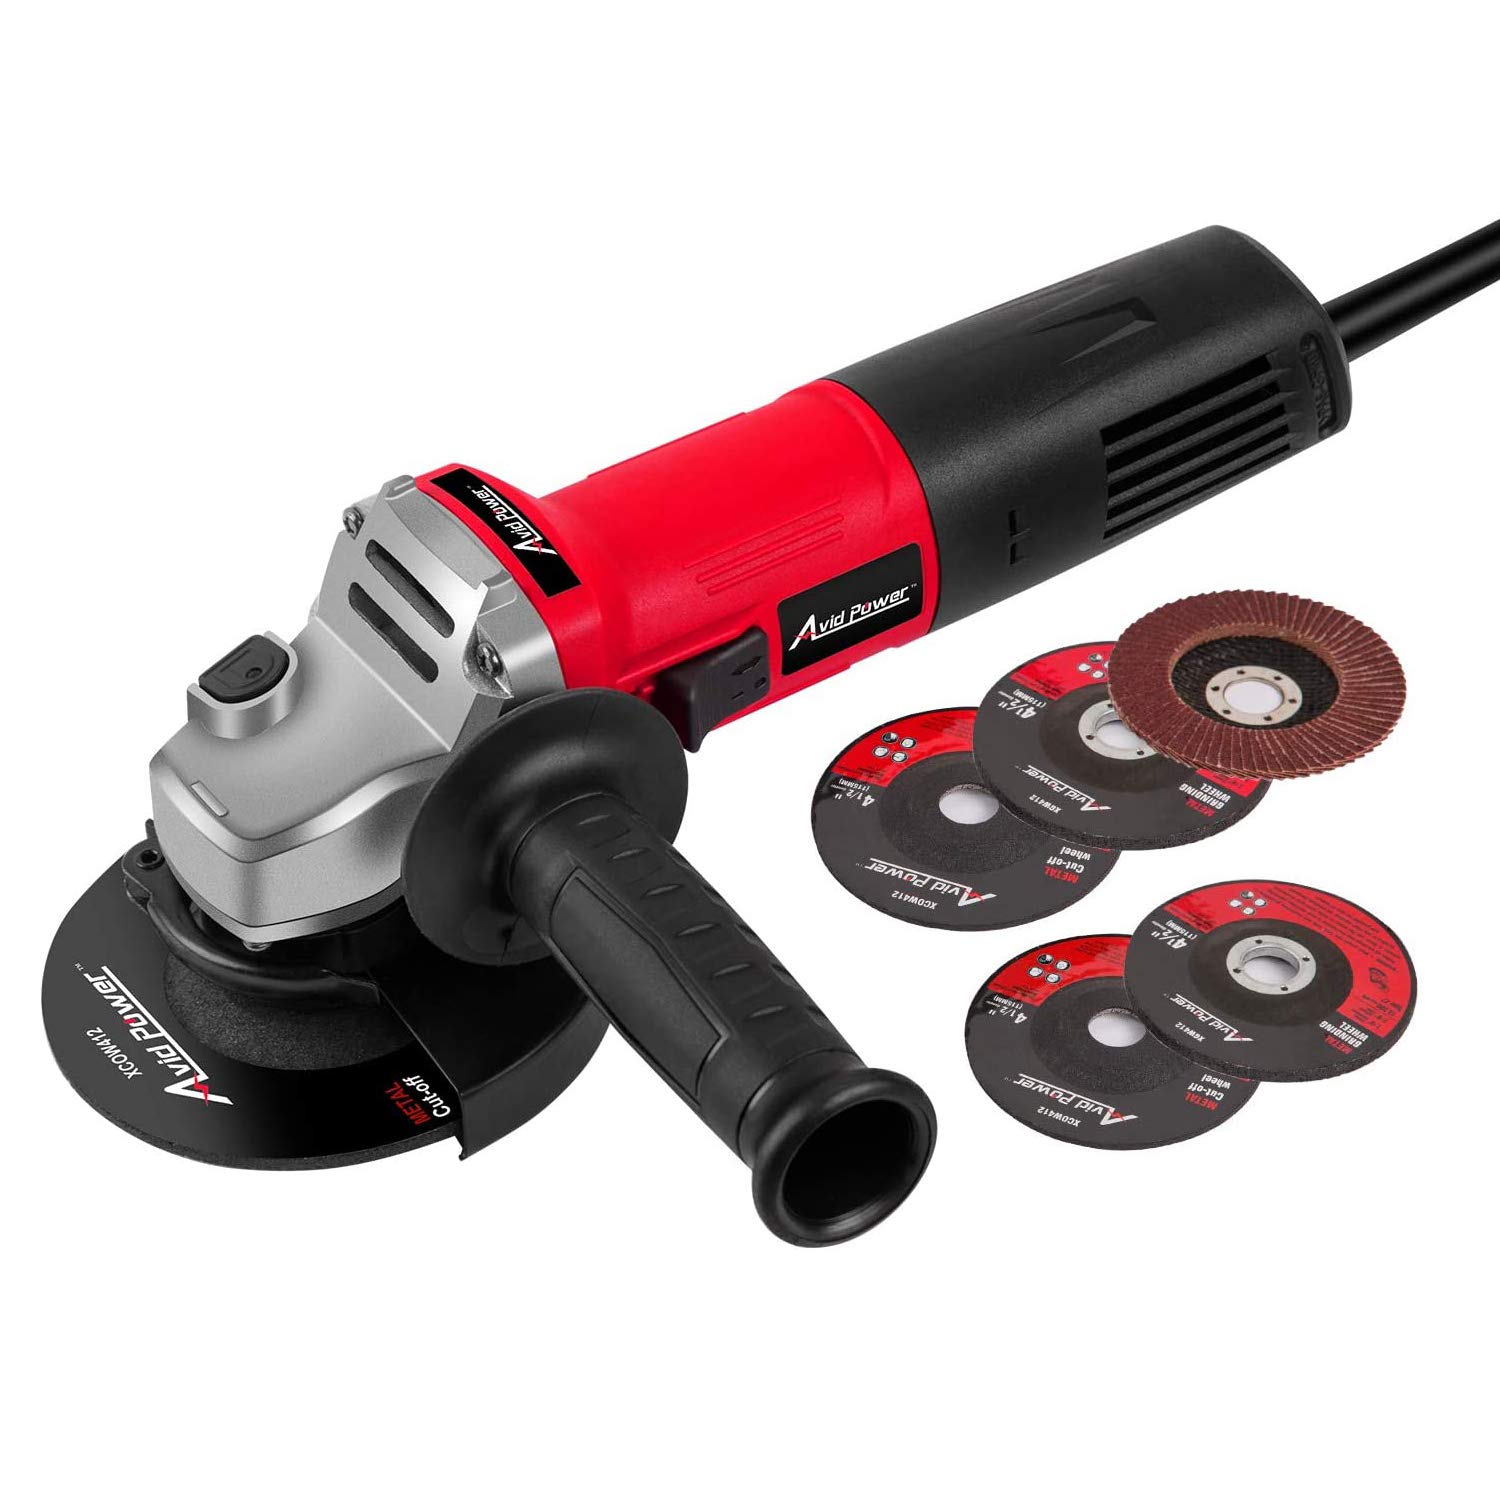 Book Cover AVID POWER Angle Grinder, 7.5-Amp 4-1/2 inch Electric Grinder Power Tools with Grinding Wheels, Cutting Wheels, Flap Disc and Auxiliary Handle for Cutting, Grinding, Polishing and Rust Removal - Red 1-red